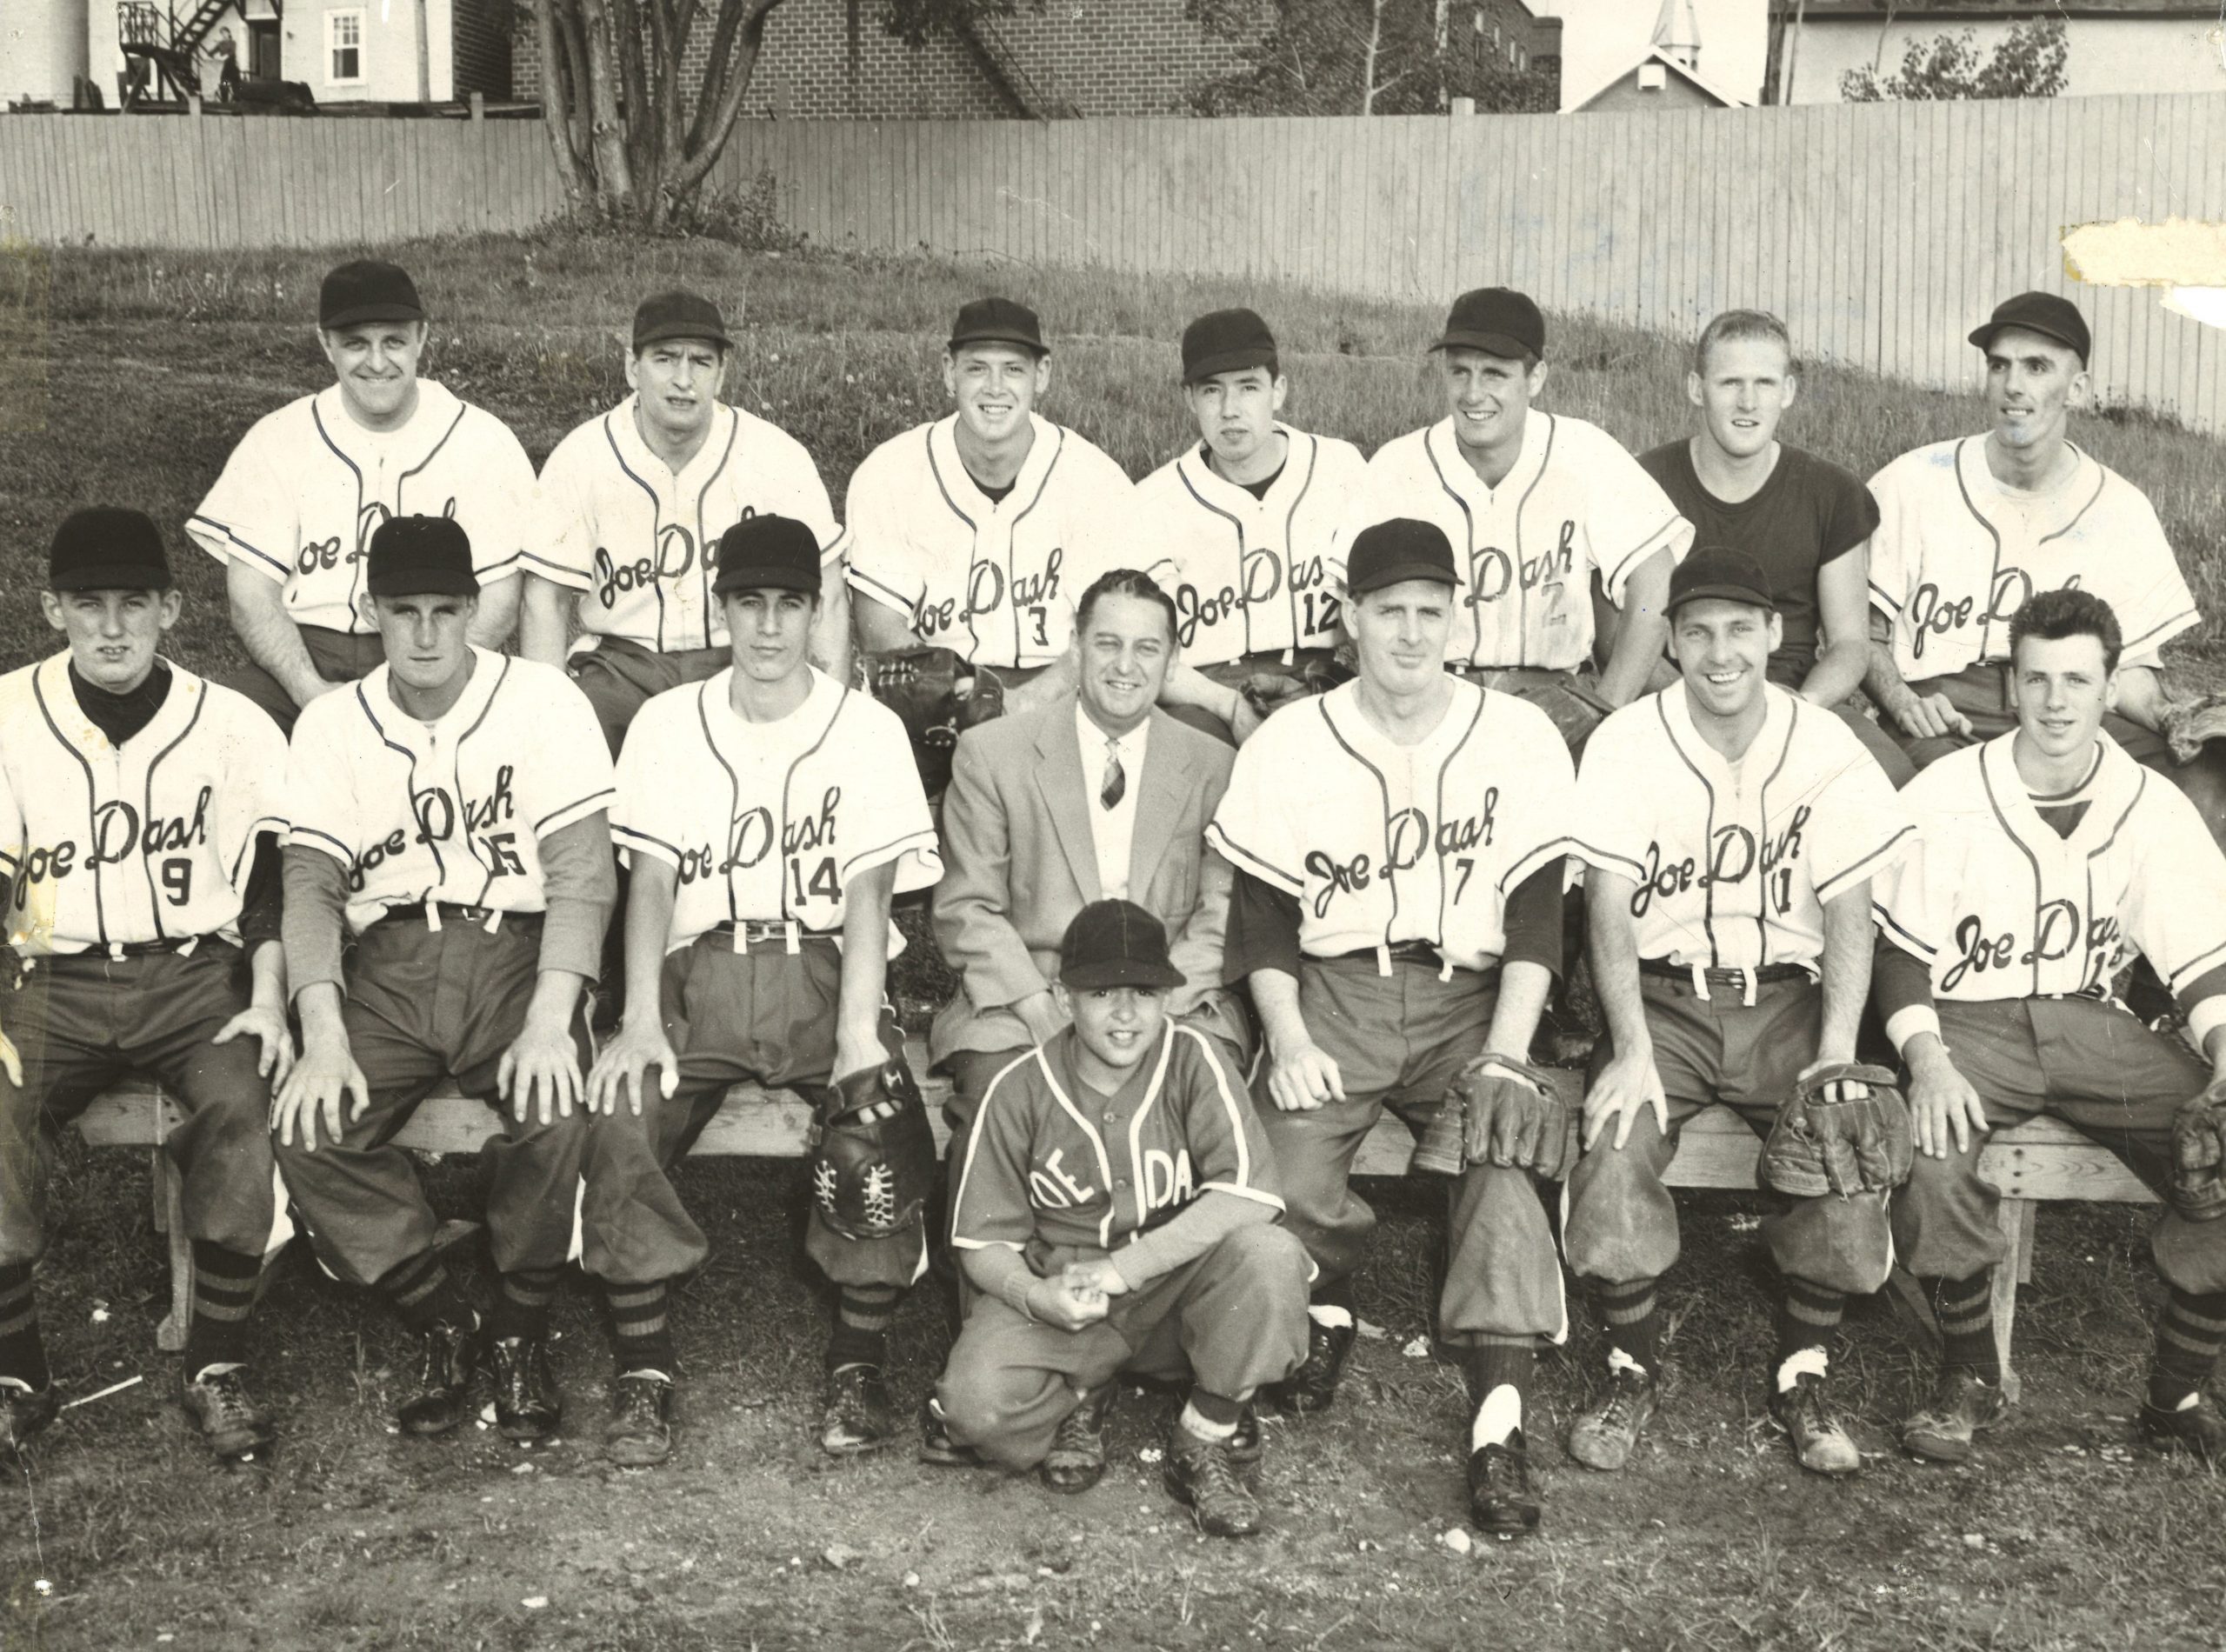 Black and white photograph of baseball players and bat boy, most are in uniform. The team sponsor of Joe Dash is written on each shirt.